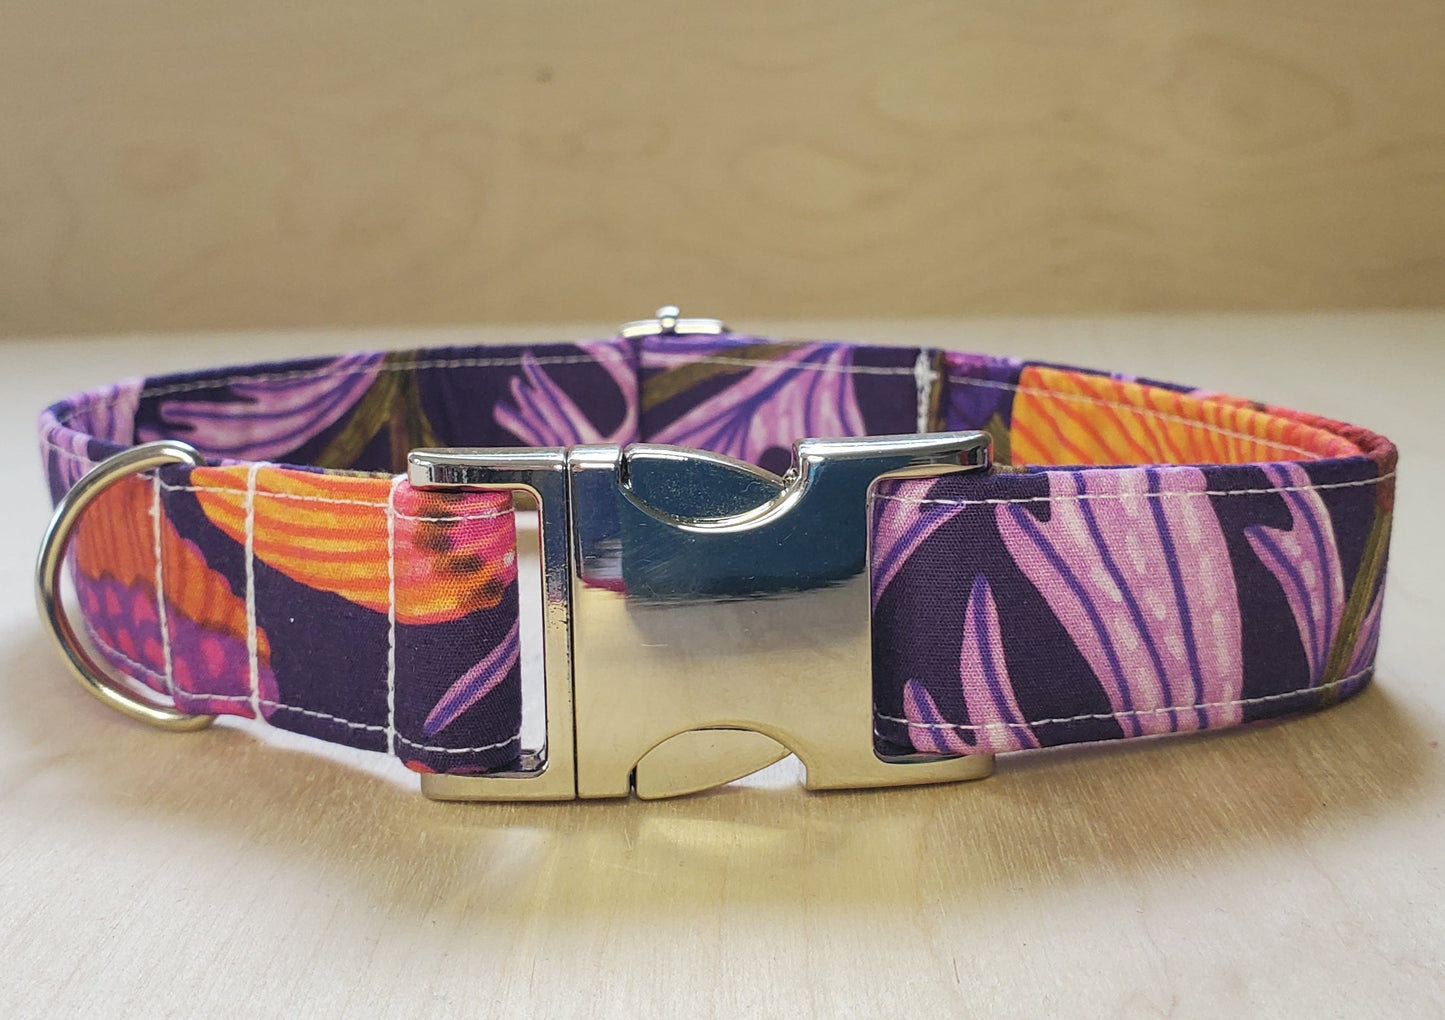 Aussie Floral Fusion Dog Collar and Leash Set